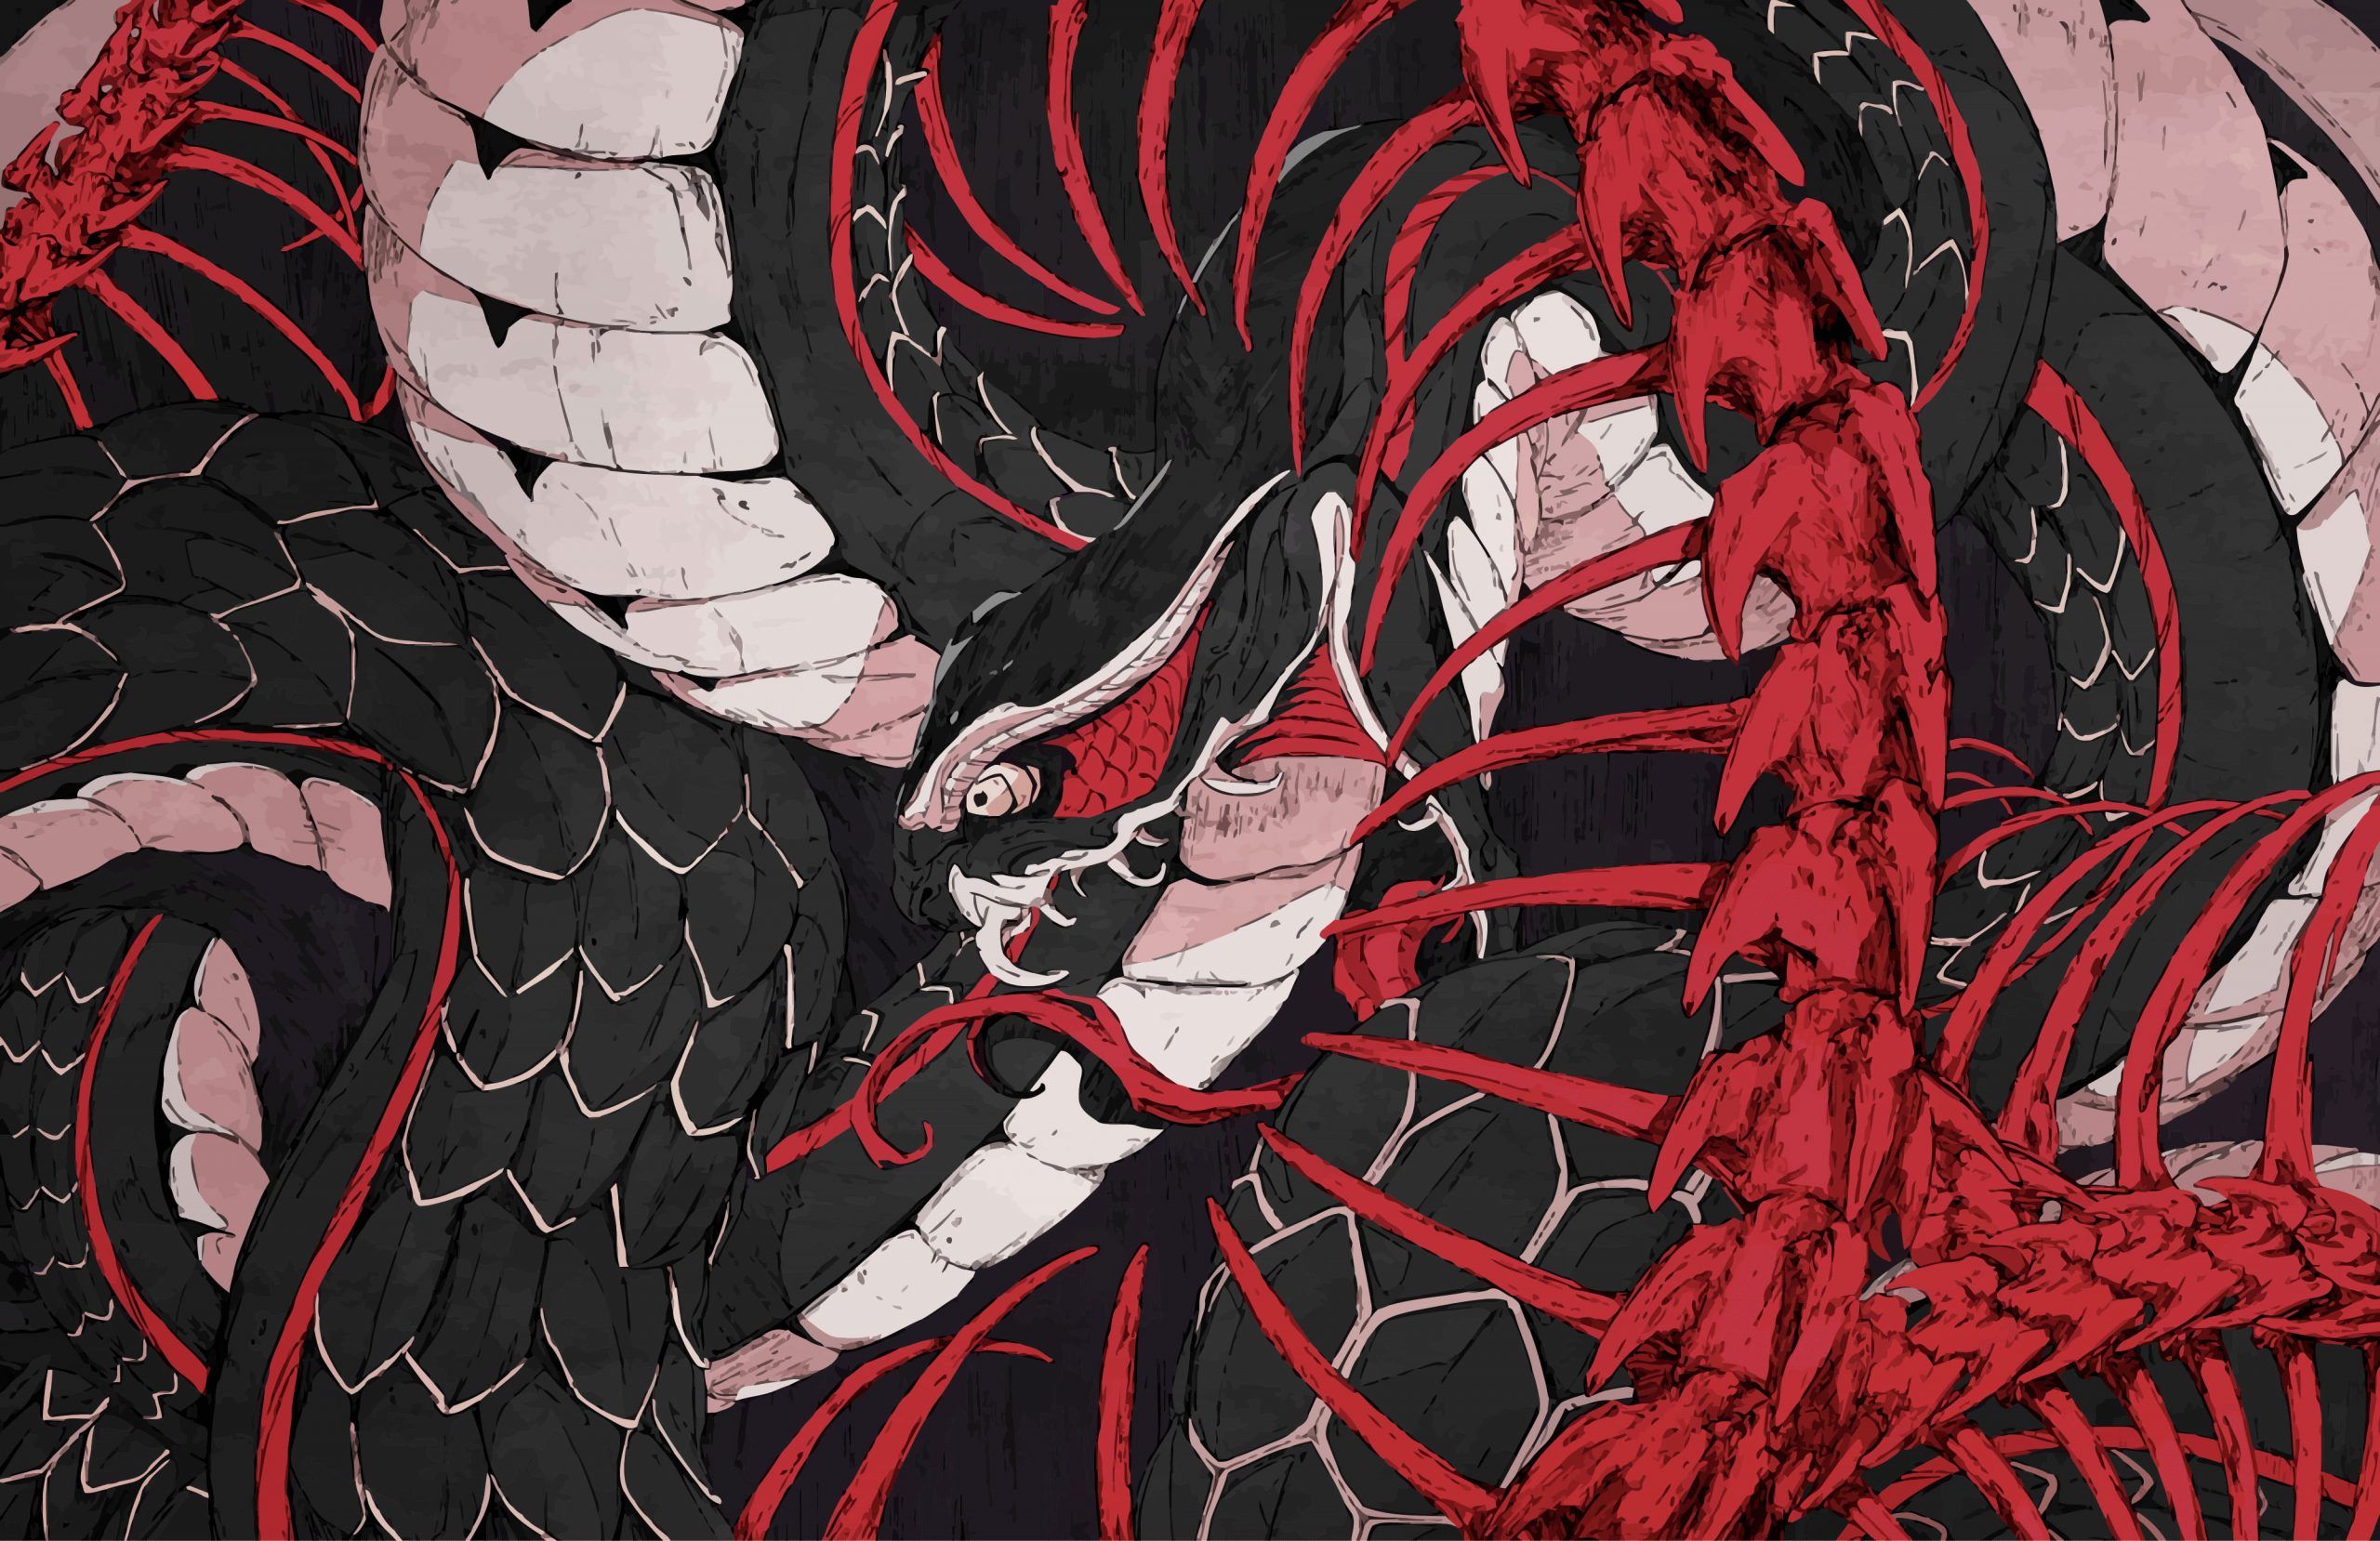 A black and red dragon is about to eat a white snake. - Snake